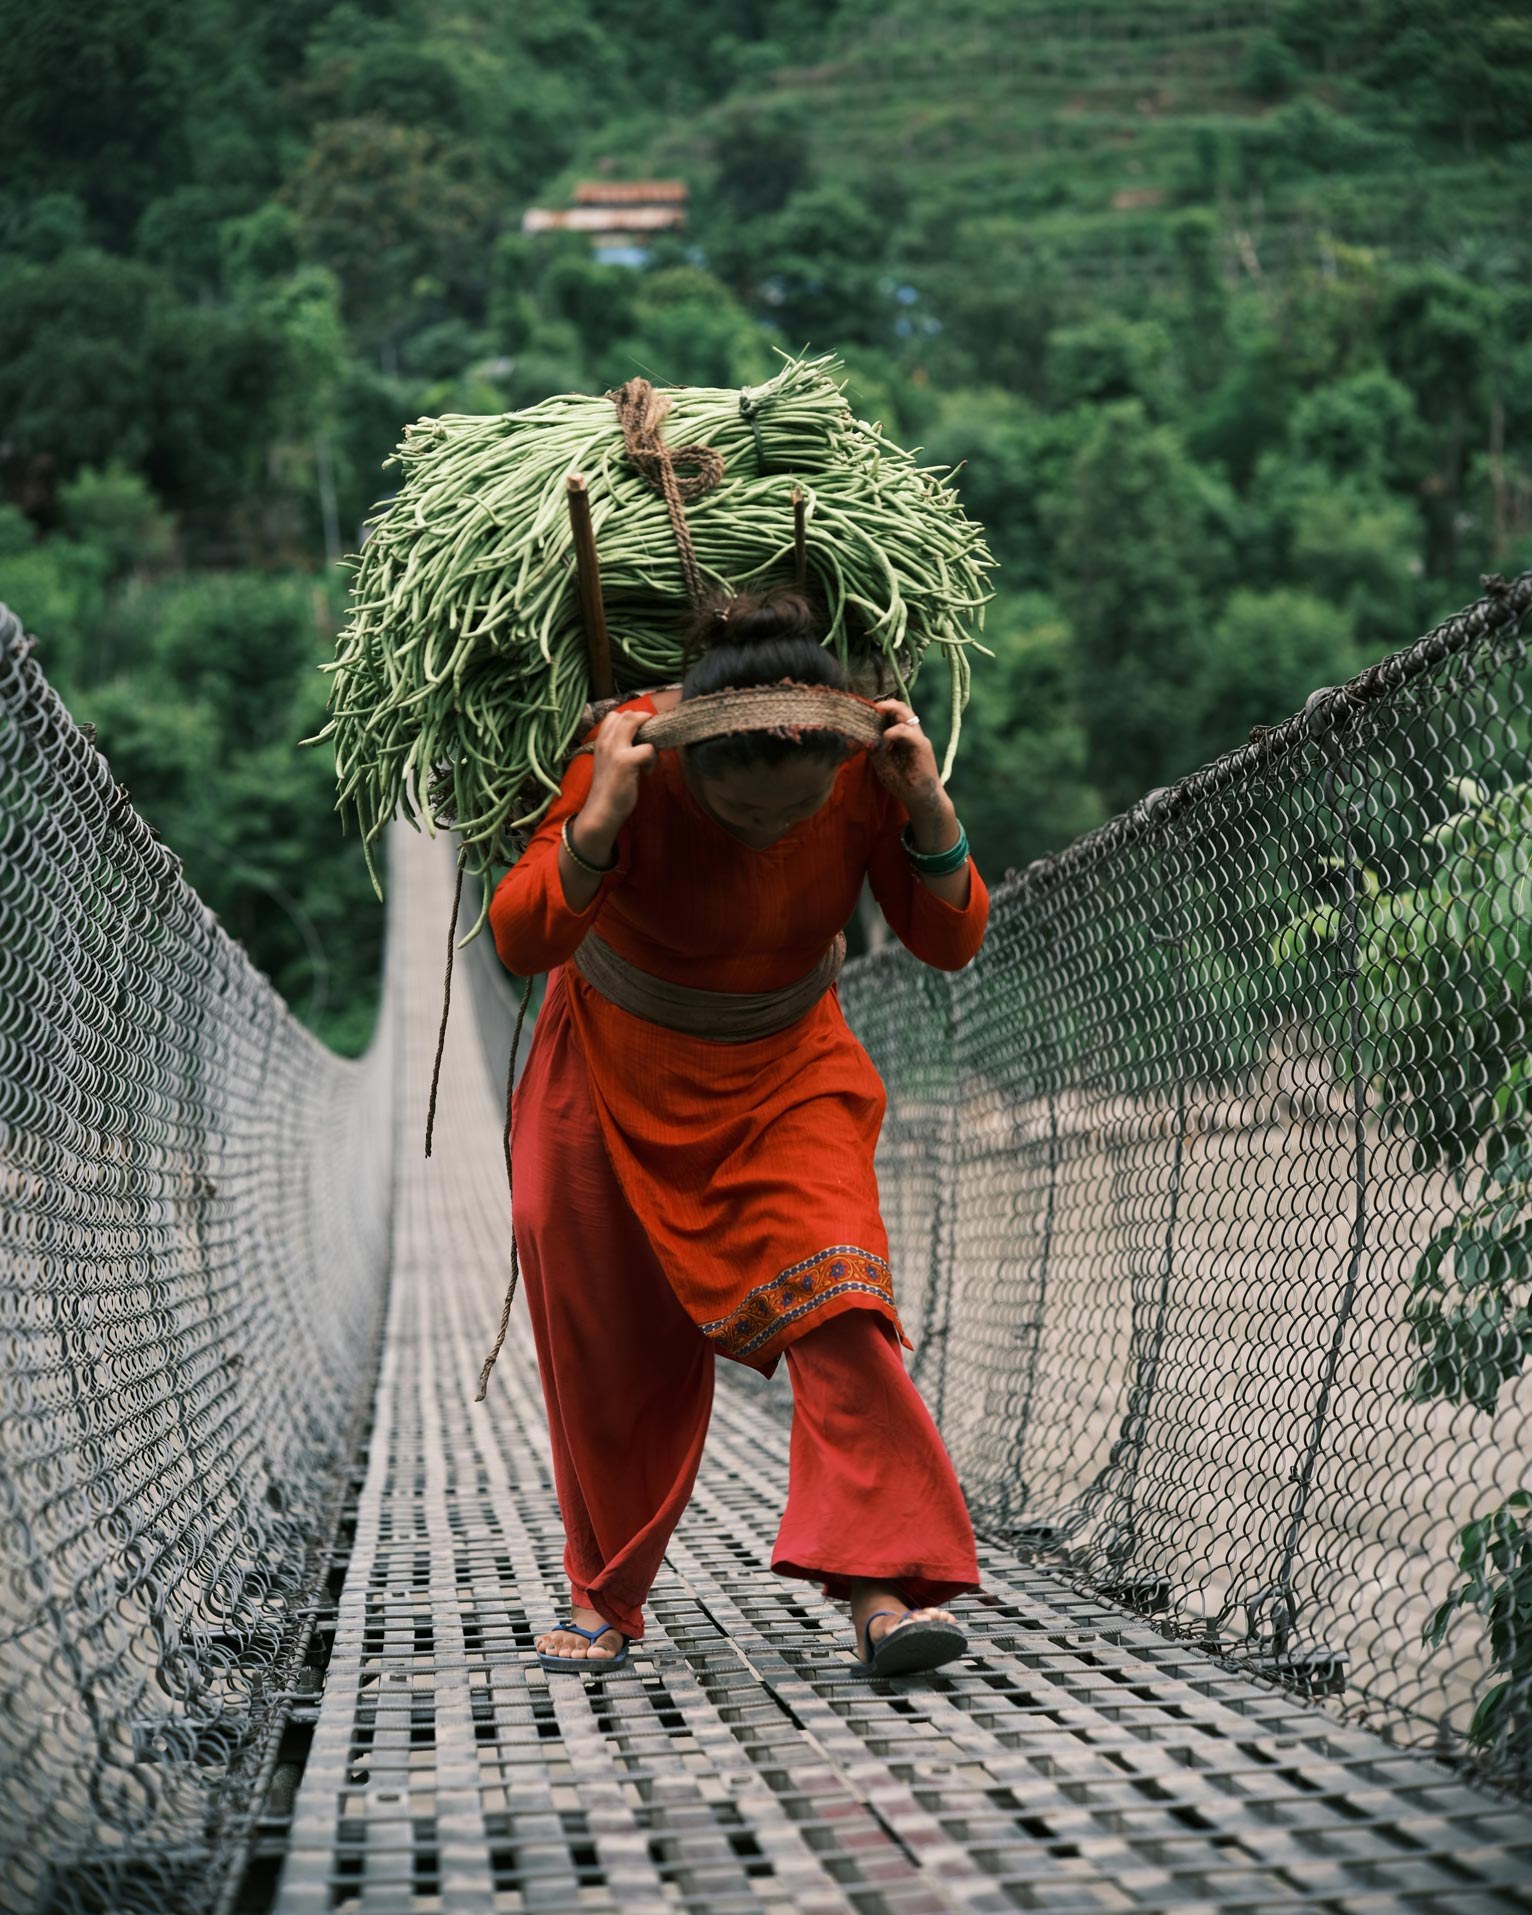 Suspension bridges in Nepal greatly improve the living conditions of the local population. (Image by Hua Ling via Unsplash)